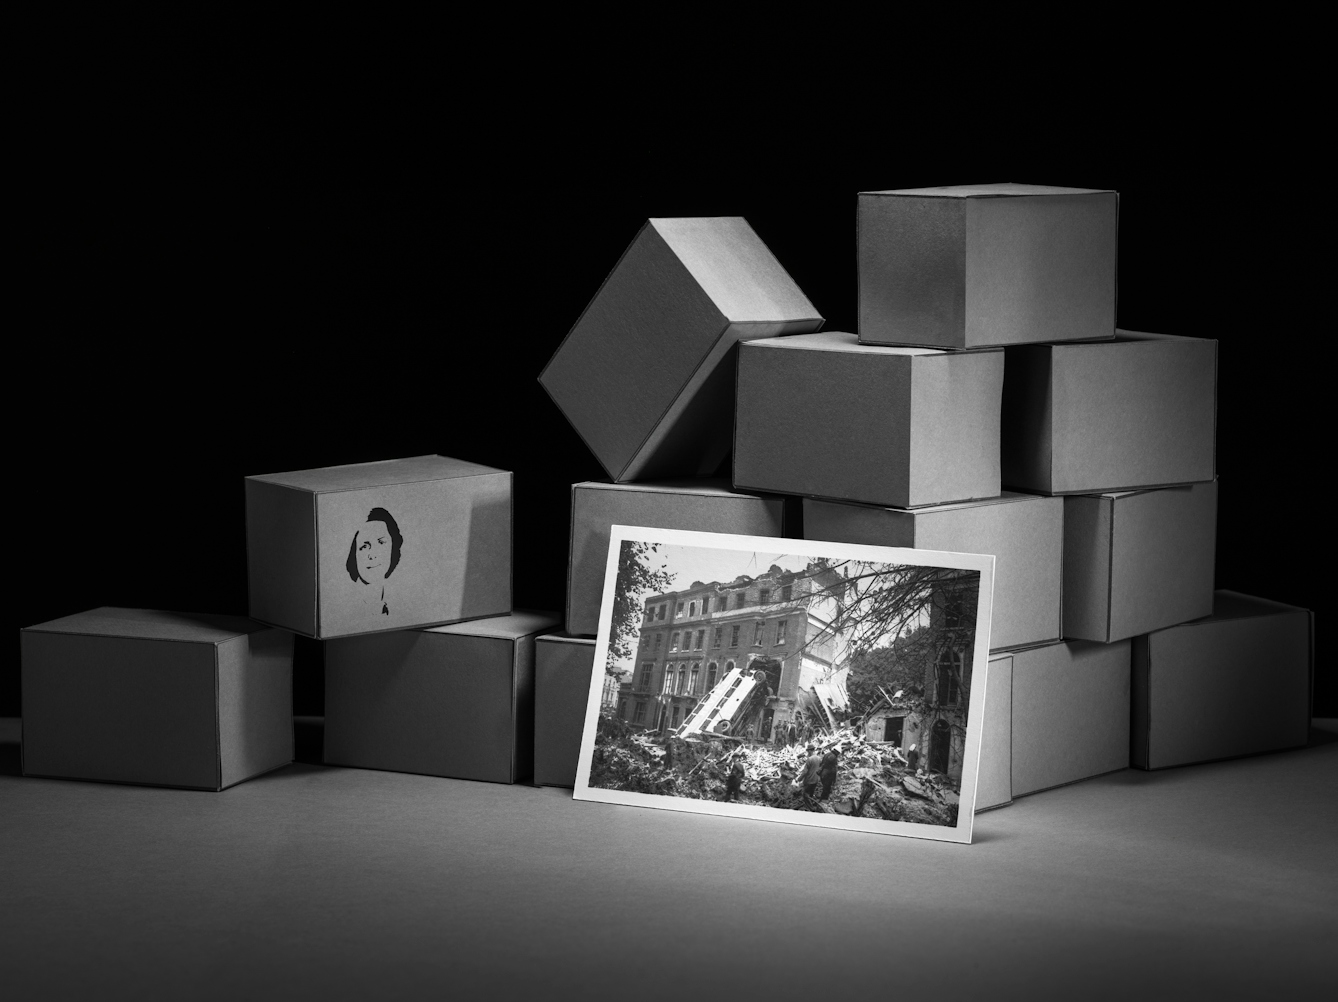 Photograph of a set-built scene made up of a grey card horizontal base against a black vertical background. Built into a mock wall are many rectangular brick blocks also made out of grey card. The bricks are stacked together in an untidy pile. Leaning up against the brick wall is a photographic print showing the destruction of London in the Blitz. Stencilled onto the side of one of the boxes is a portrait of a young woman with short hair.